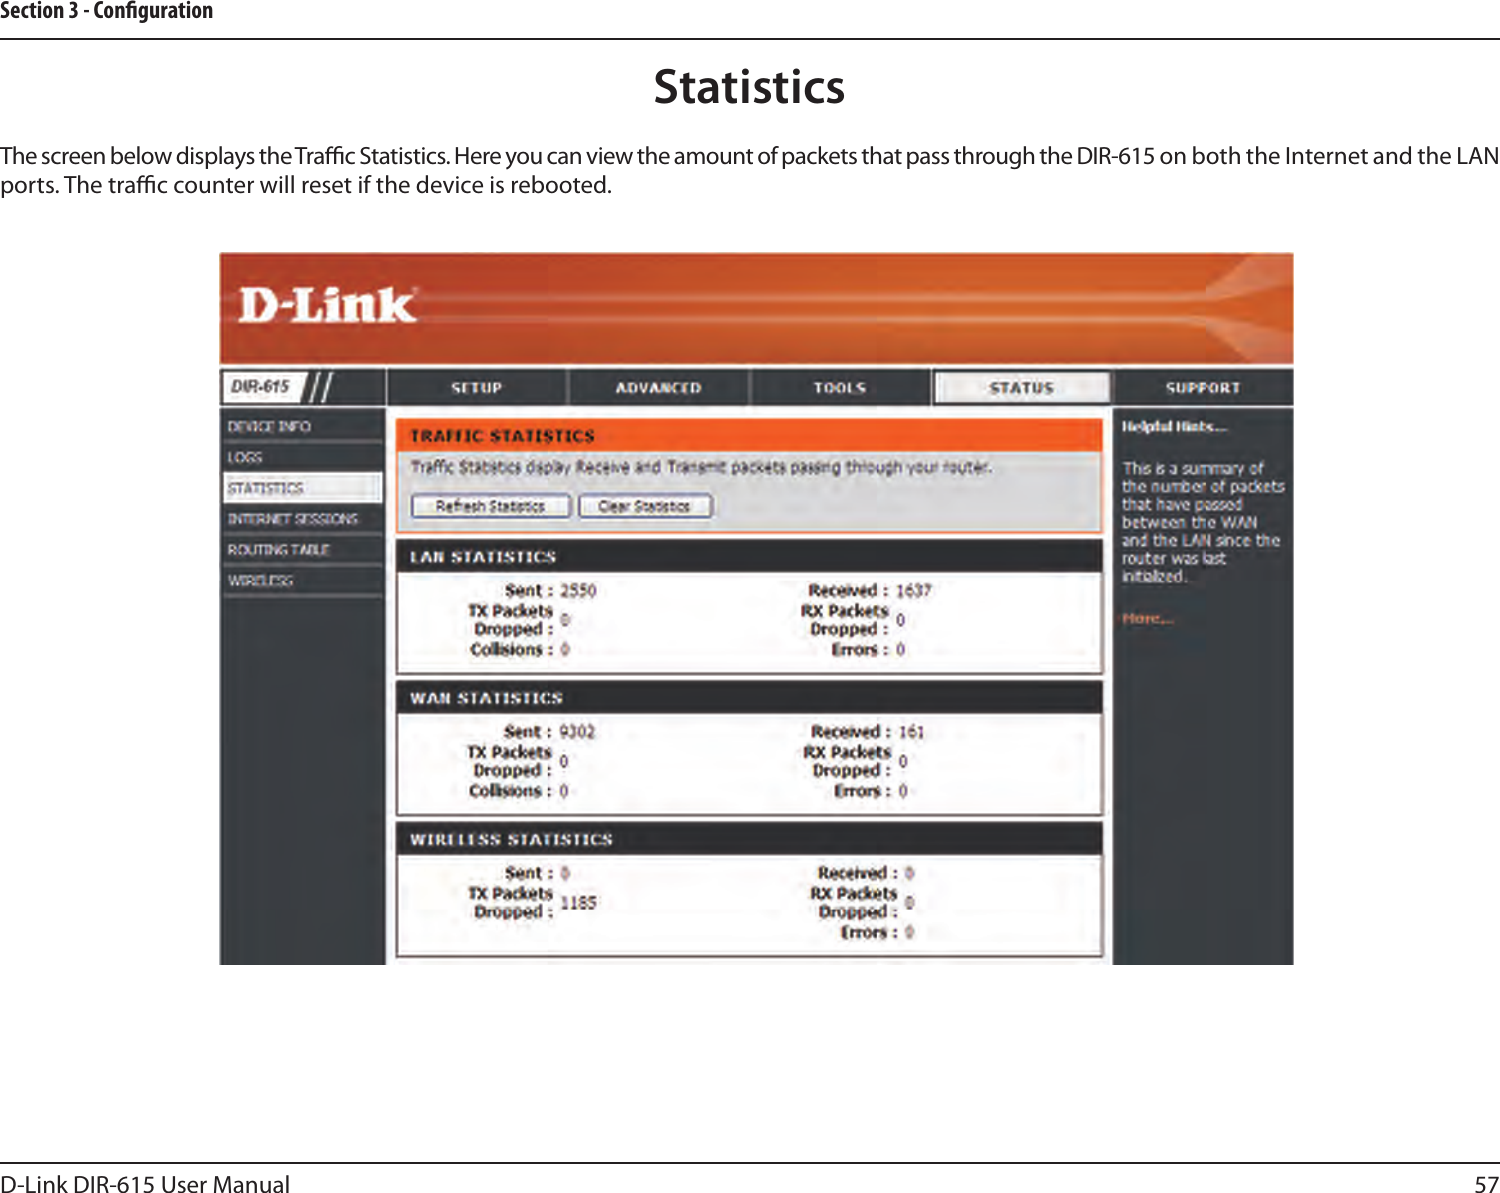 57D-Link DIR-615 User ManualSection 3 - CongurationStatisticsThe screen below displays the Trac Statistics. Here you can view the amount of packets that pass through the DIR-615 on both the Internet and the LAN ports. The trac counter will reset if the device is rebooted.